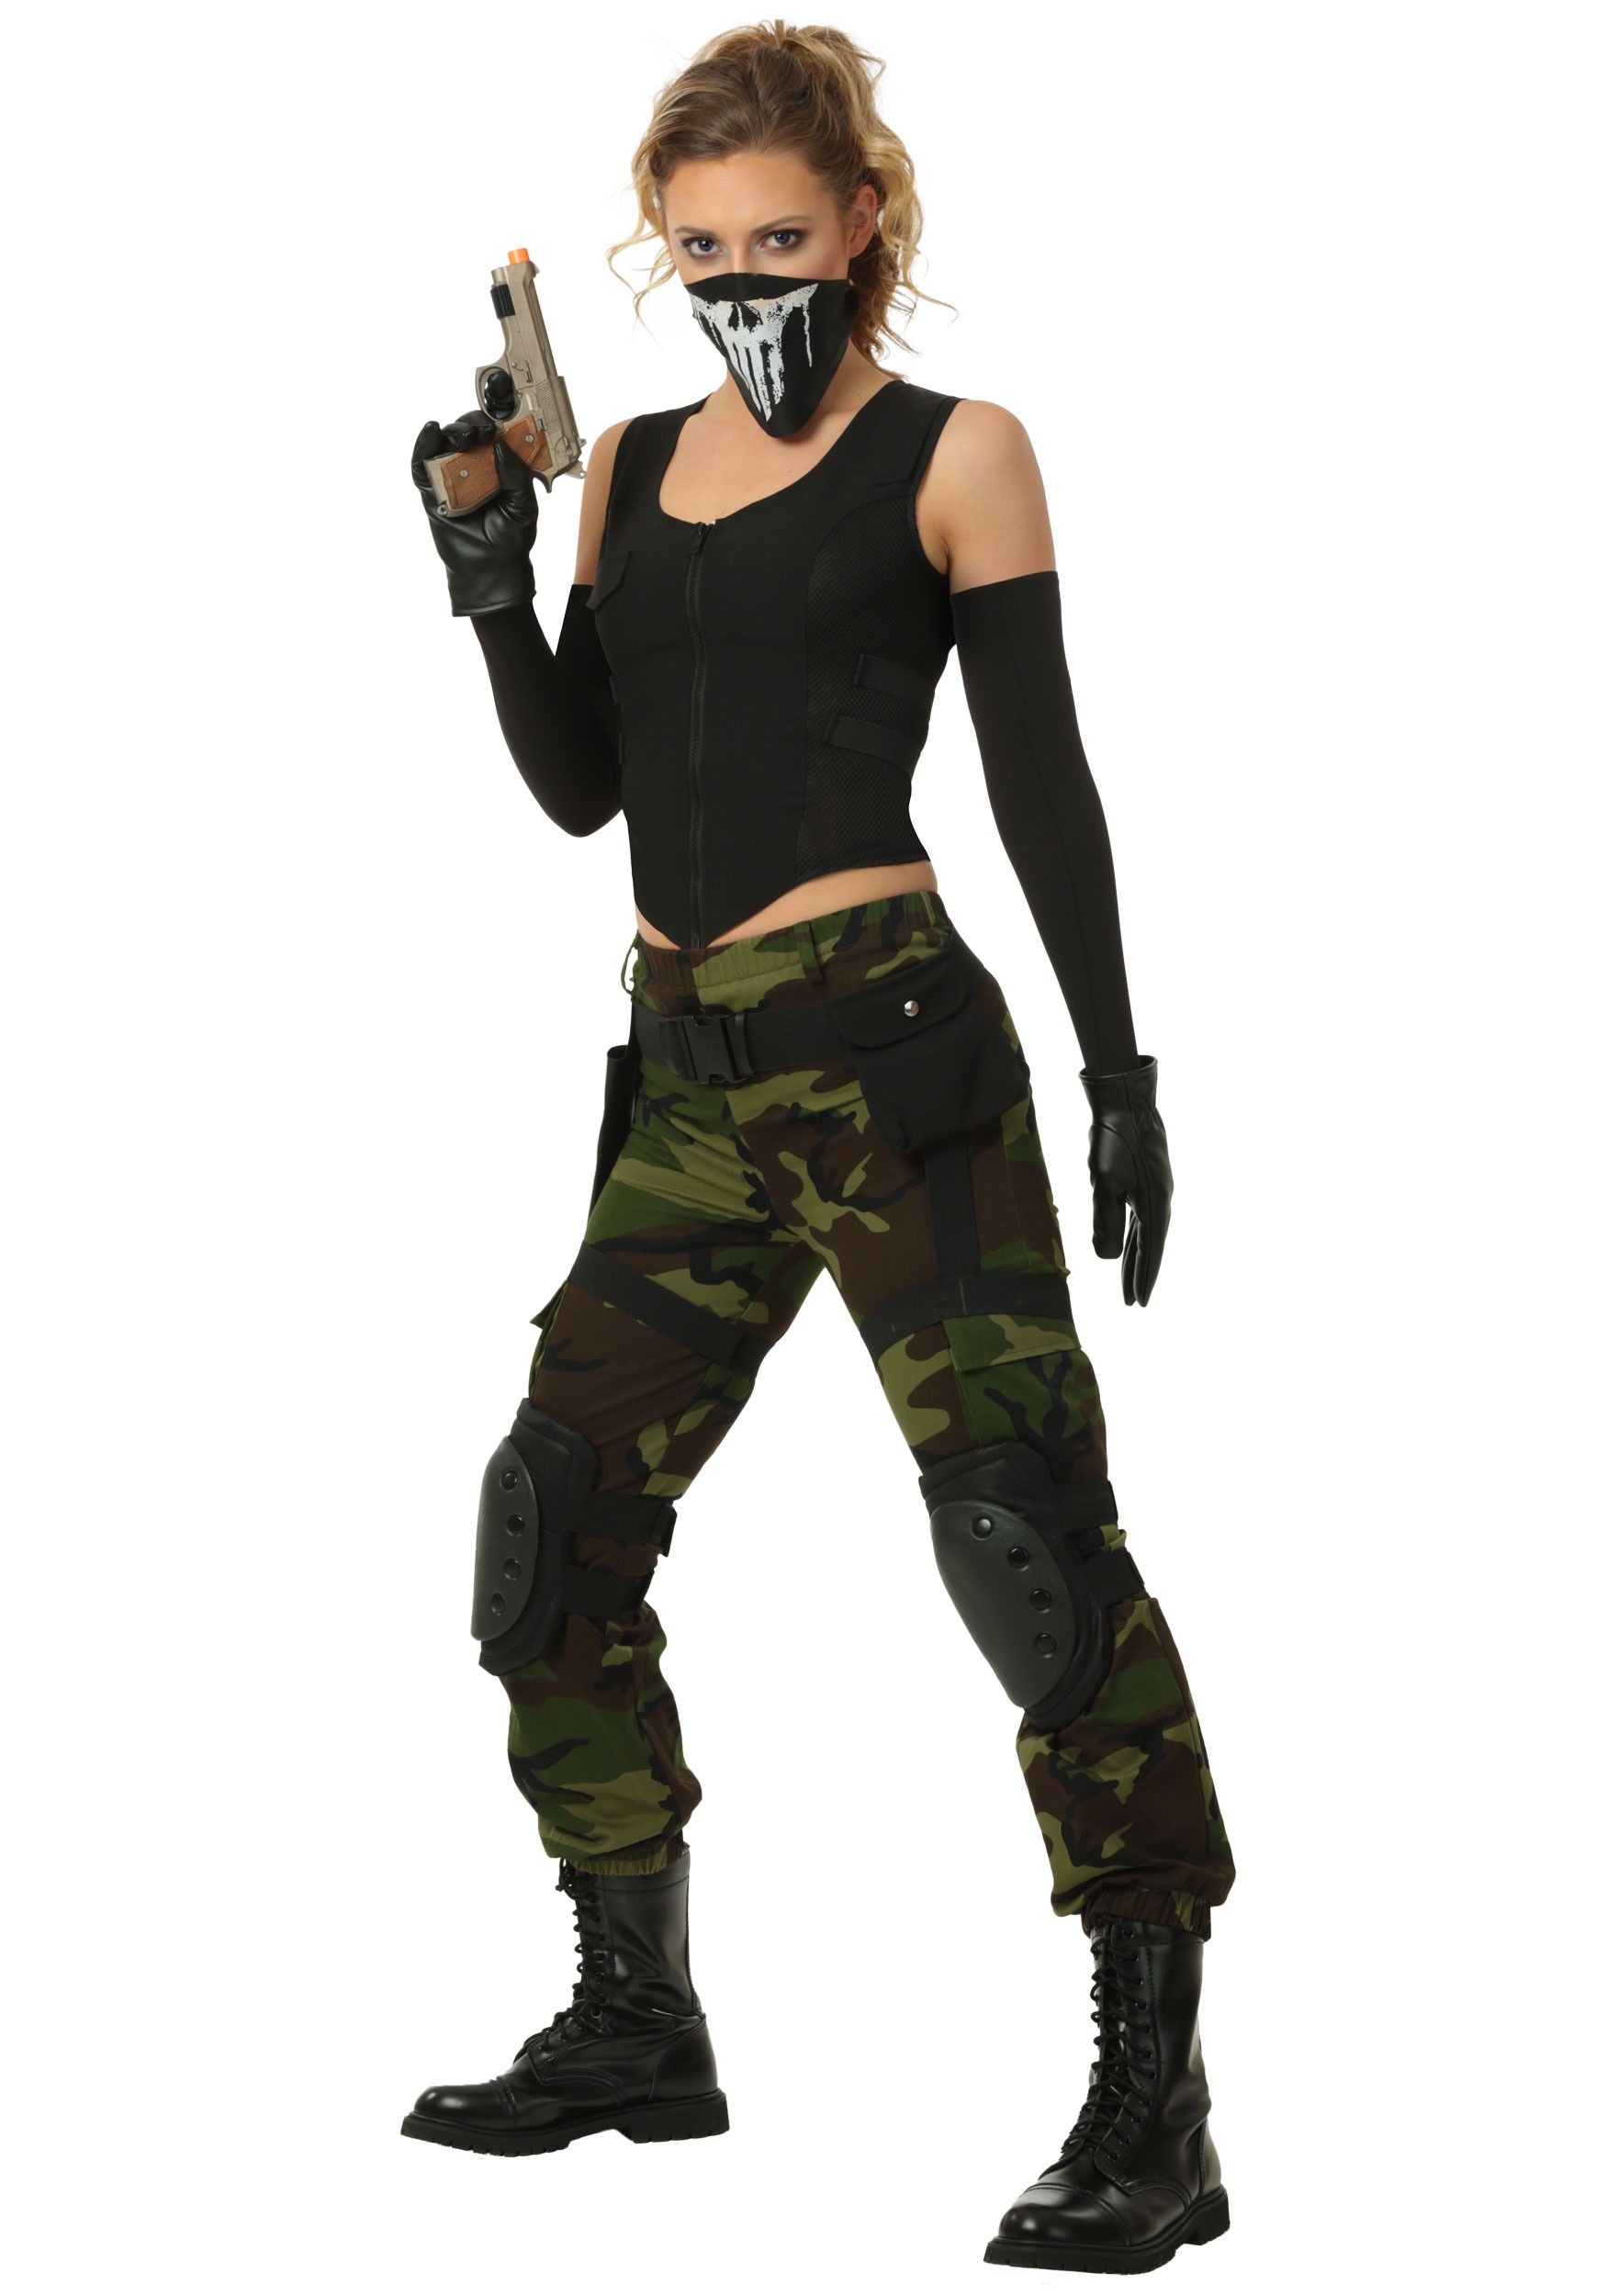 Soldier costume for women